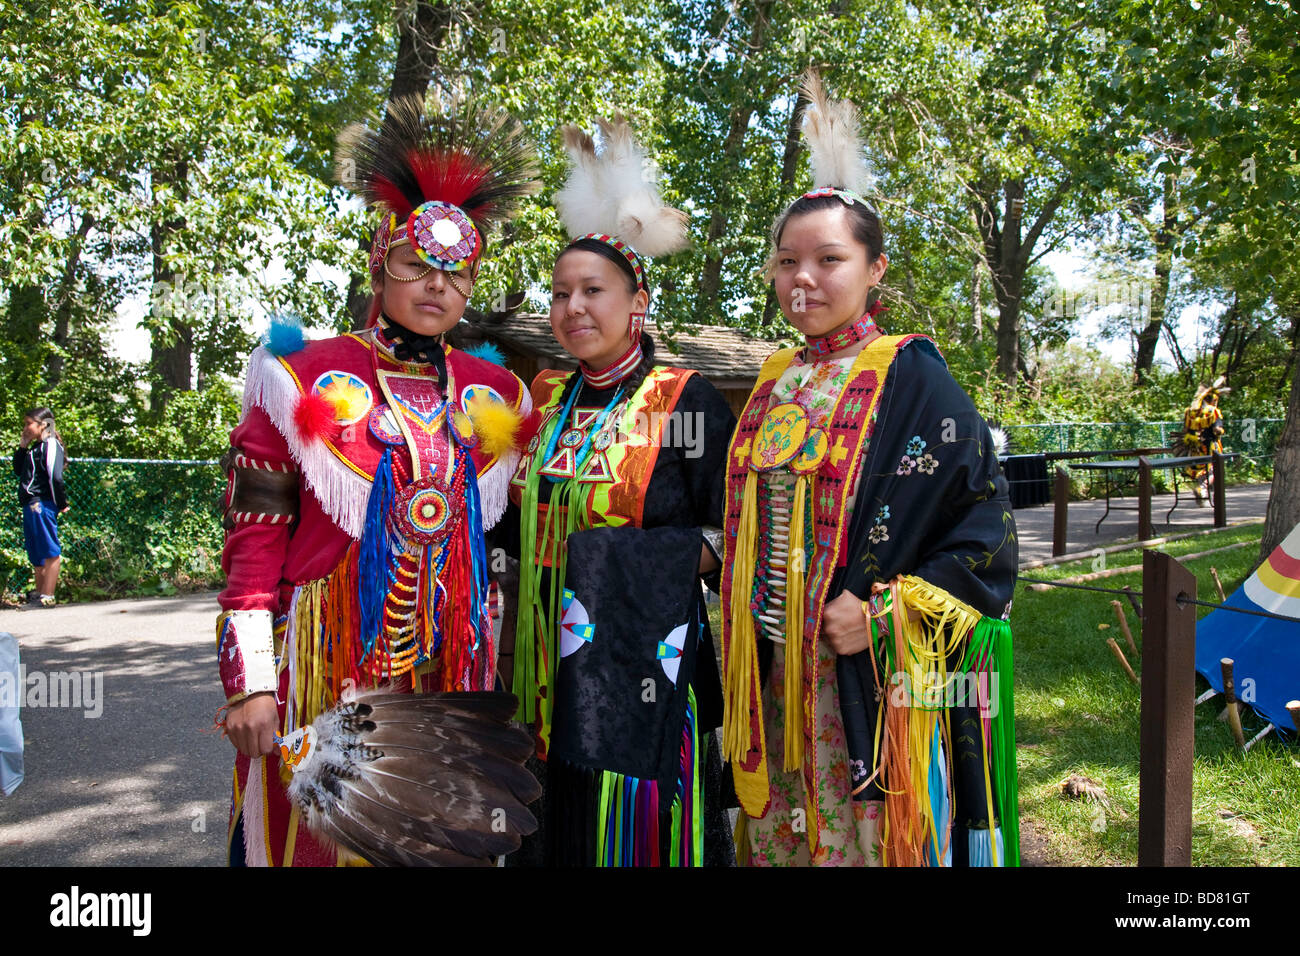 North American Plaims Native Indian in traditional dress at Pow Wow in the Indian Village at the Calgary Stampede Stock Photo